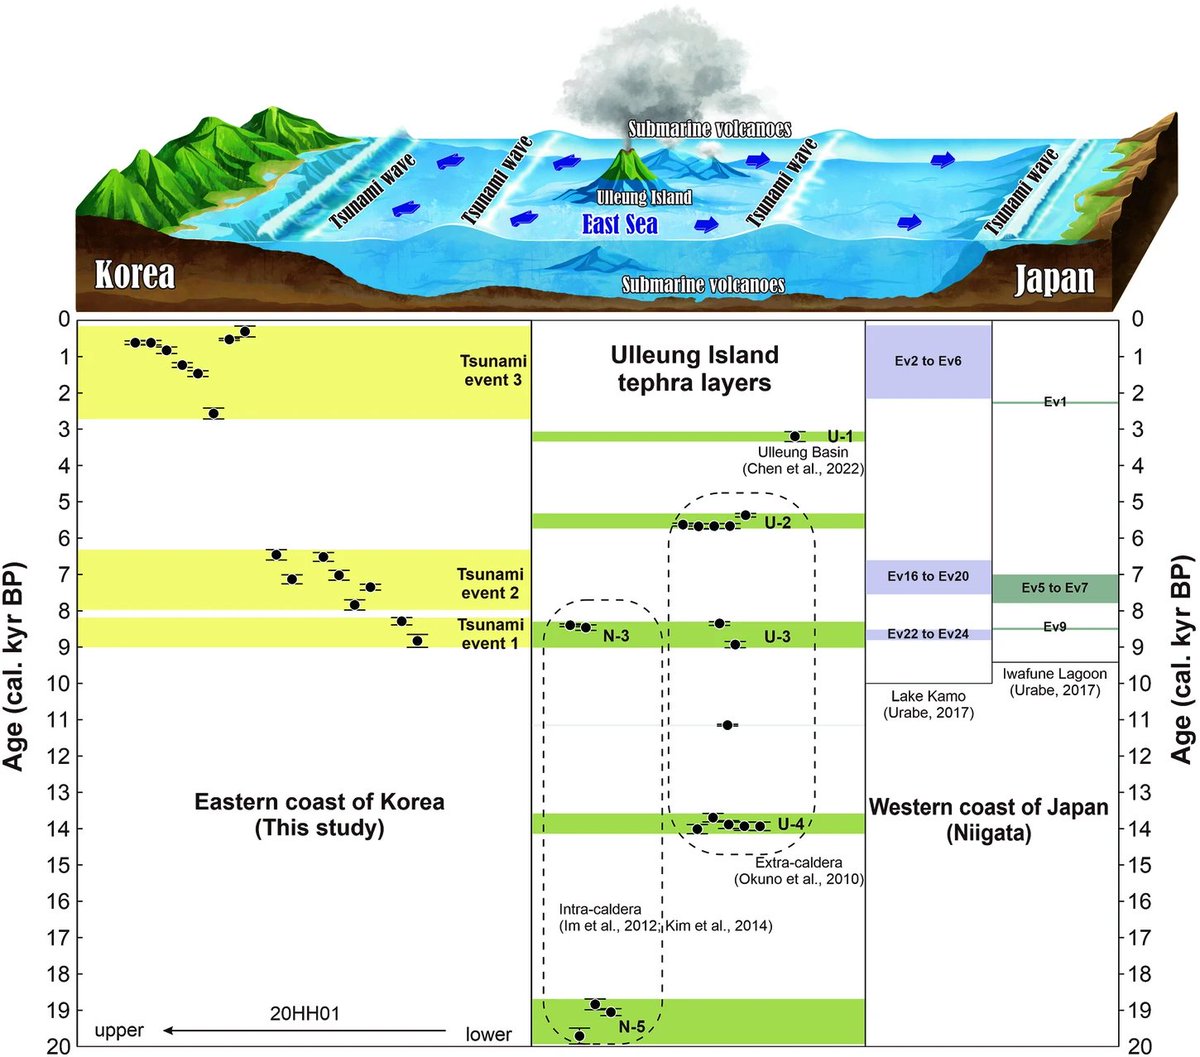 🌏Three previously undocumented tsunamis on the East coast of Korea are revealed by biological signatures in bacterial taxa that are associated with submarine volcanism. #microbial #ecology #tsunami #volcanology 🔗 nature.com/articles/s4324…